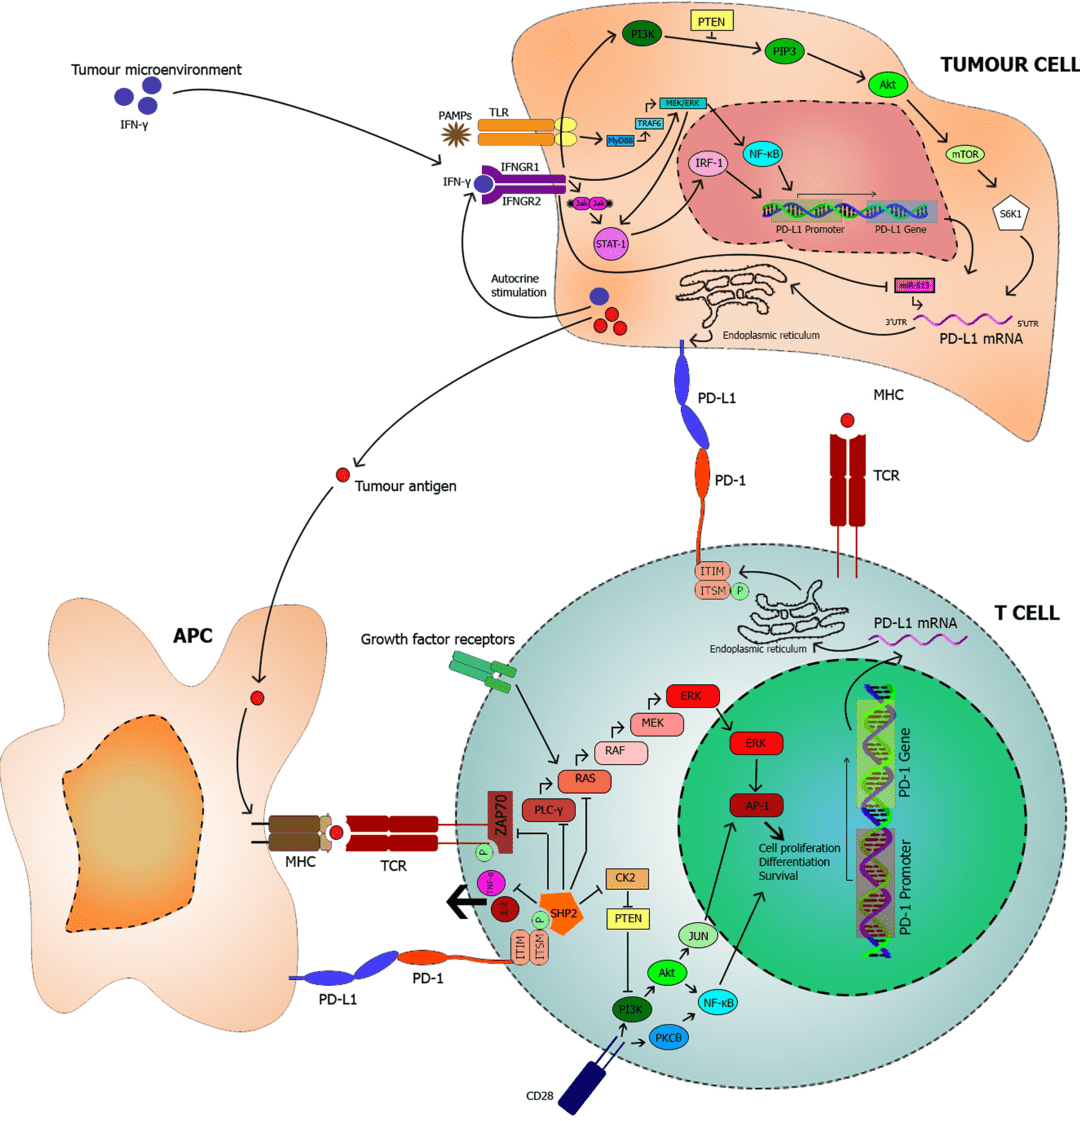 A schematic representation illustrating the signalling molecules that are linked with or influenced by the programmed death 1 (PD-1)/ programmed death ligand 1 (PD-L1) interaction.